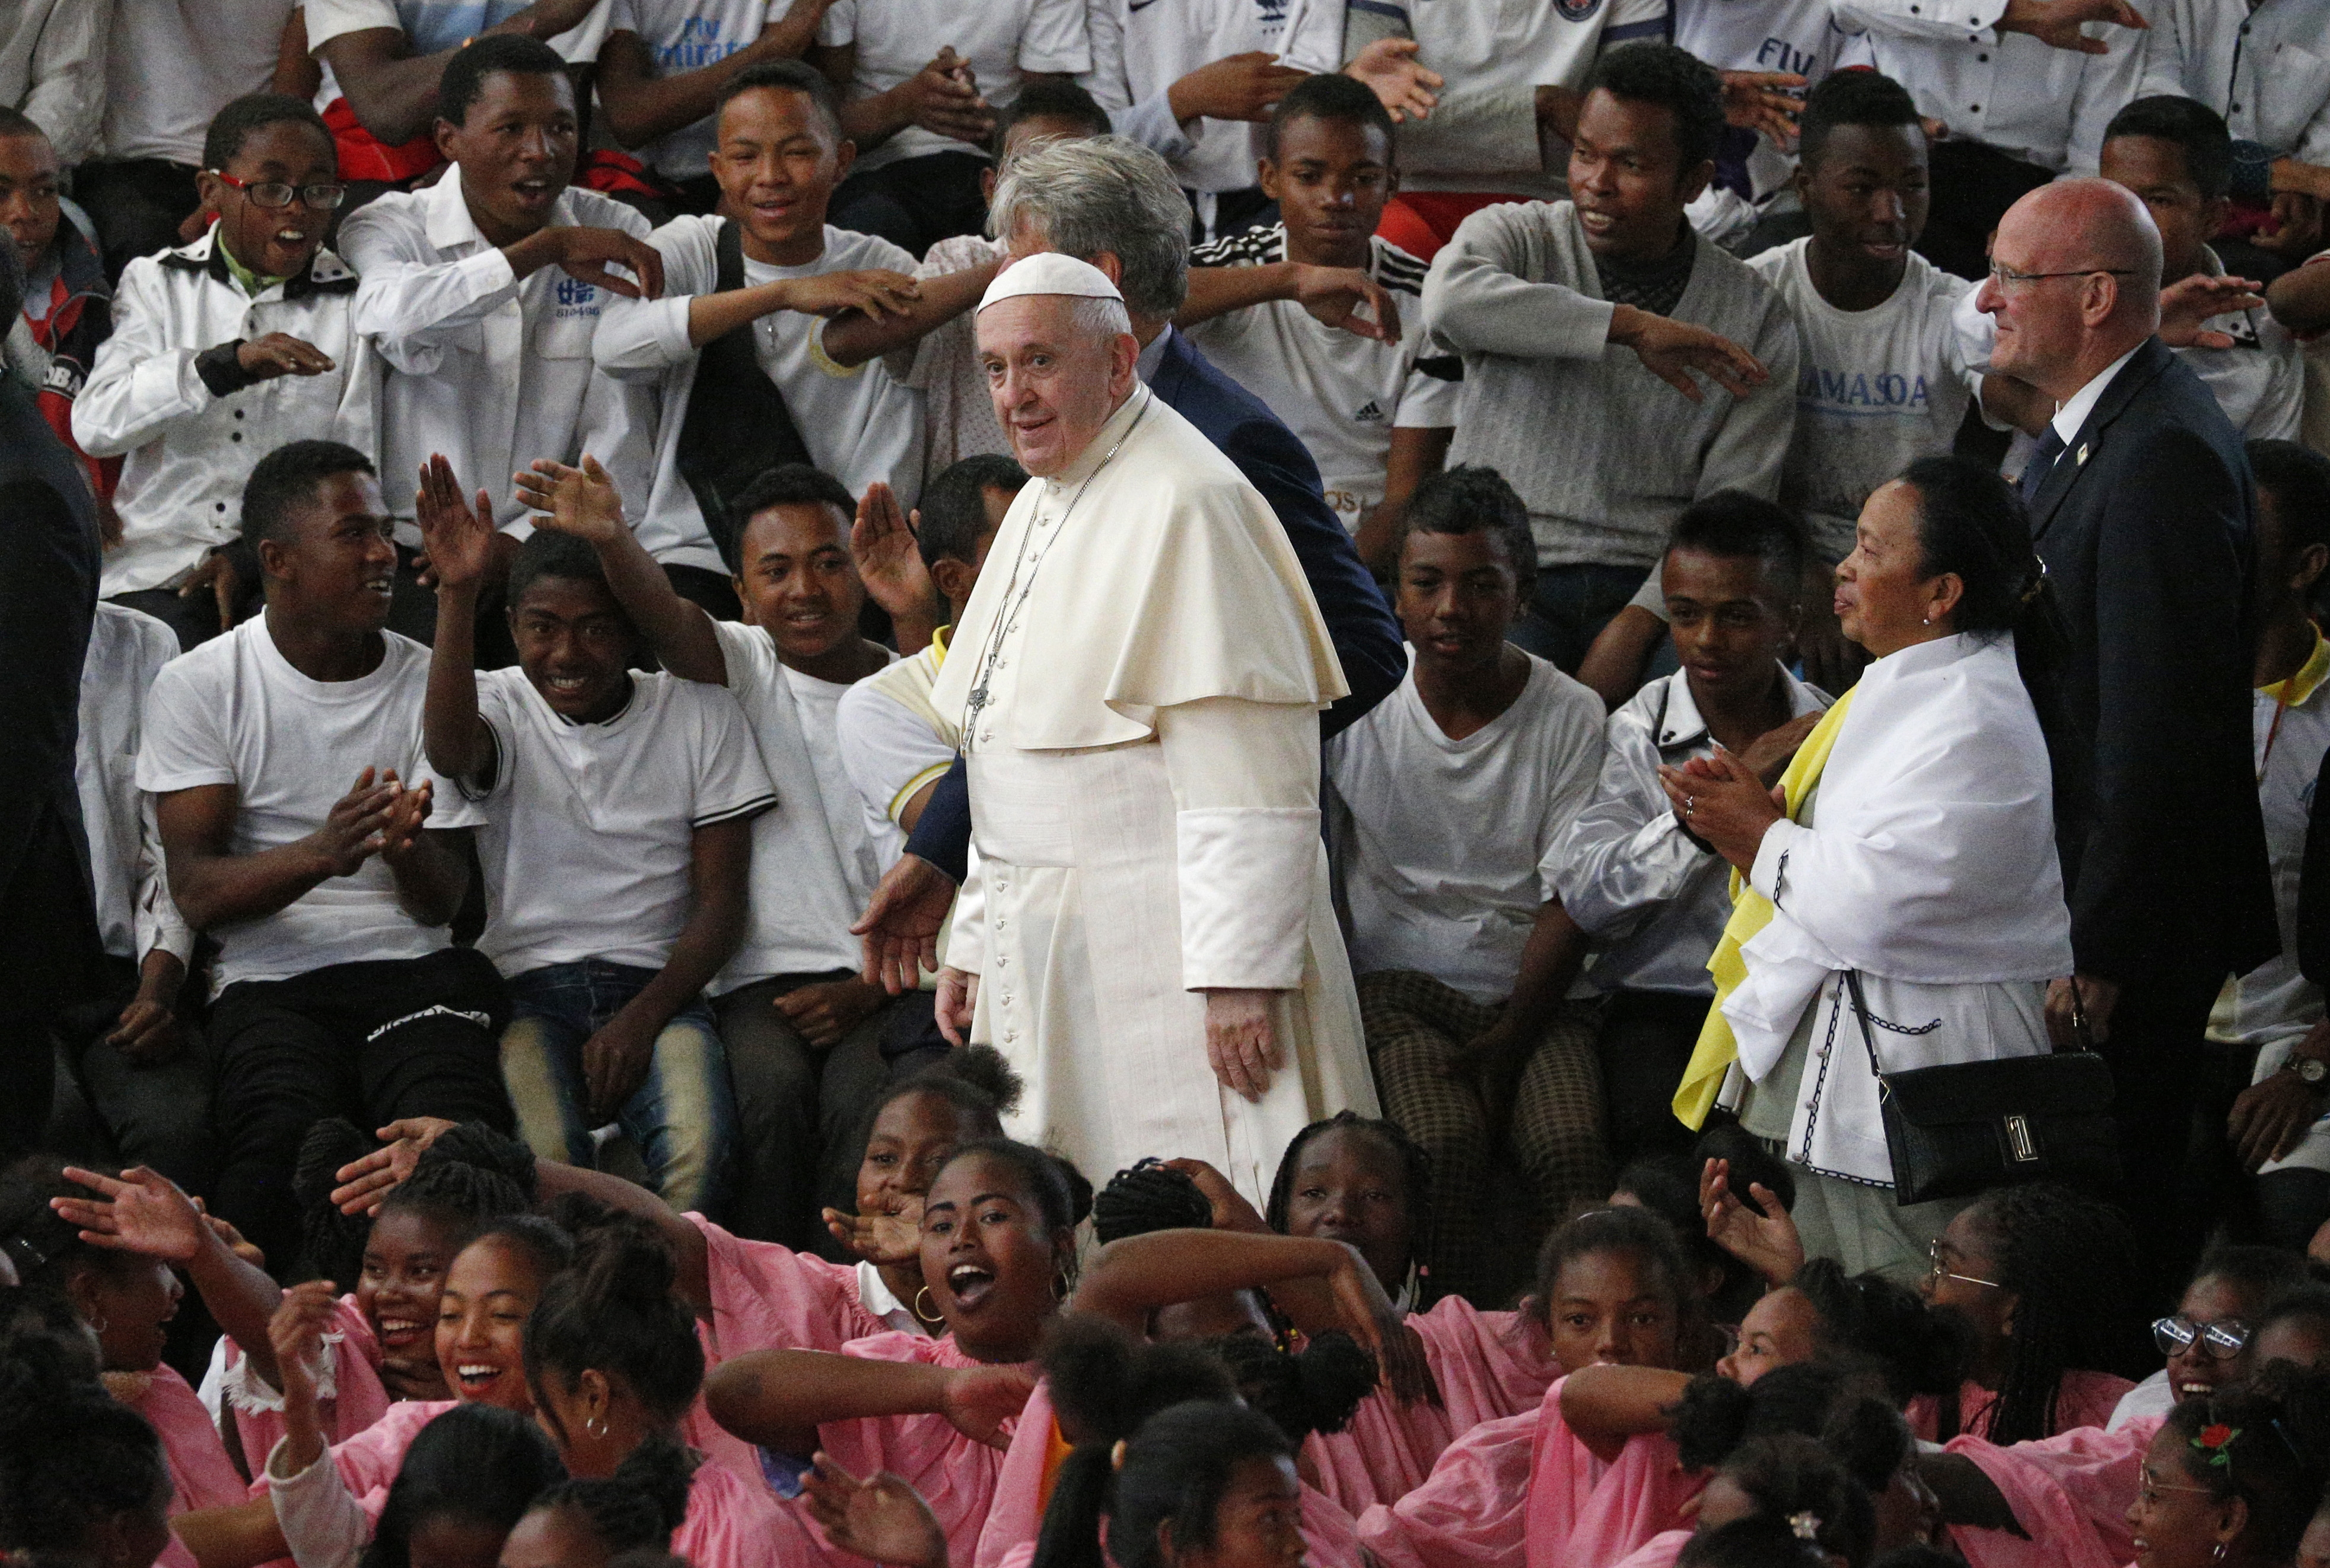 Hard work, tender hearts: Pope prays for Madagascar's working poor